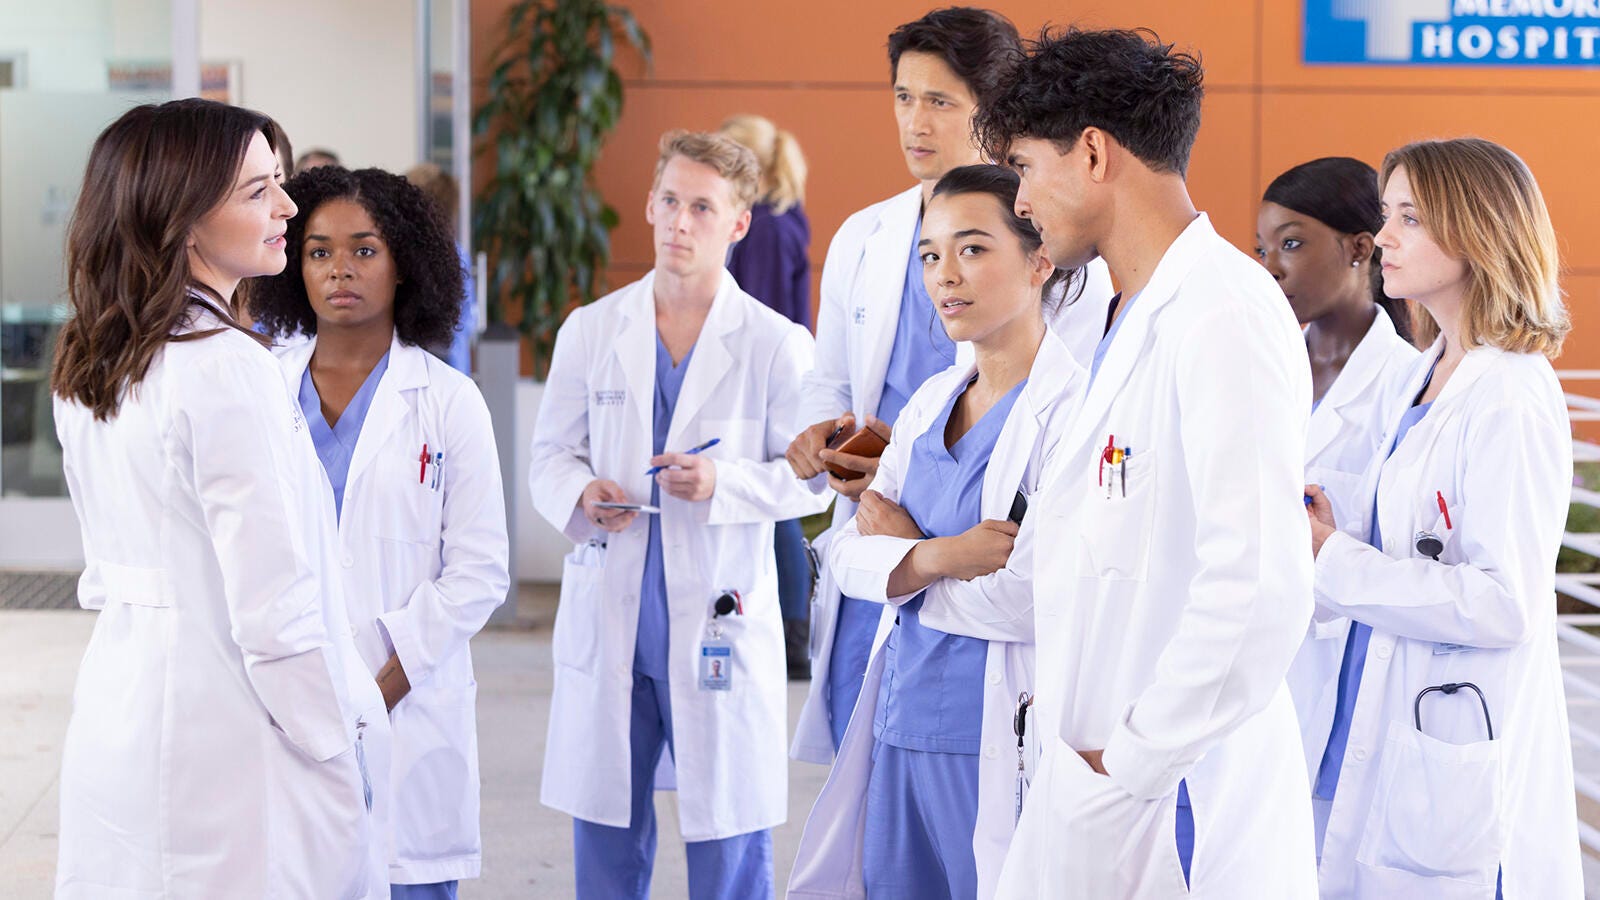 Grey's Anatomy Season 21 Release Date Speculations - Is The Popular ABC Show Finally Renewed For Another Run? 